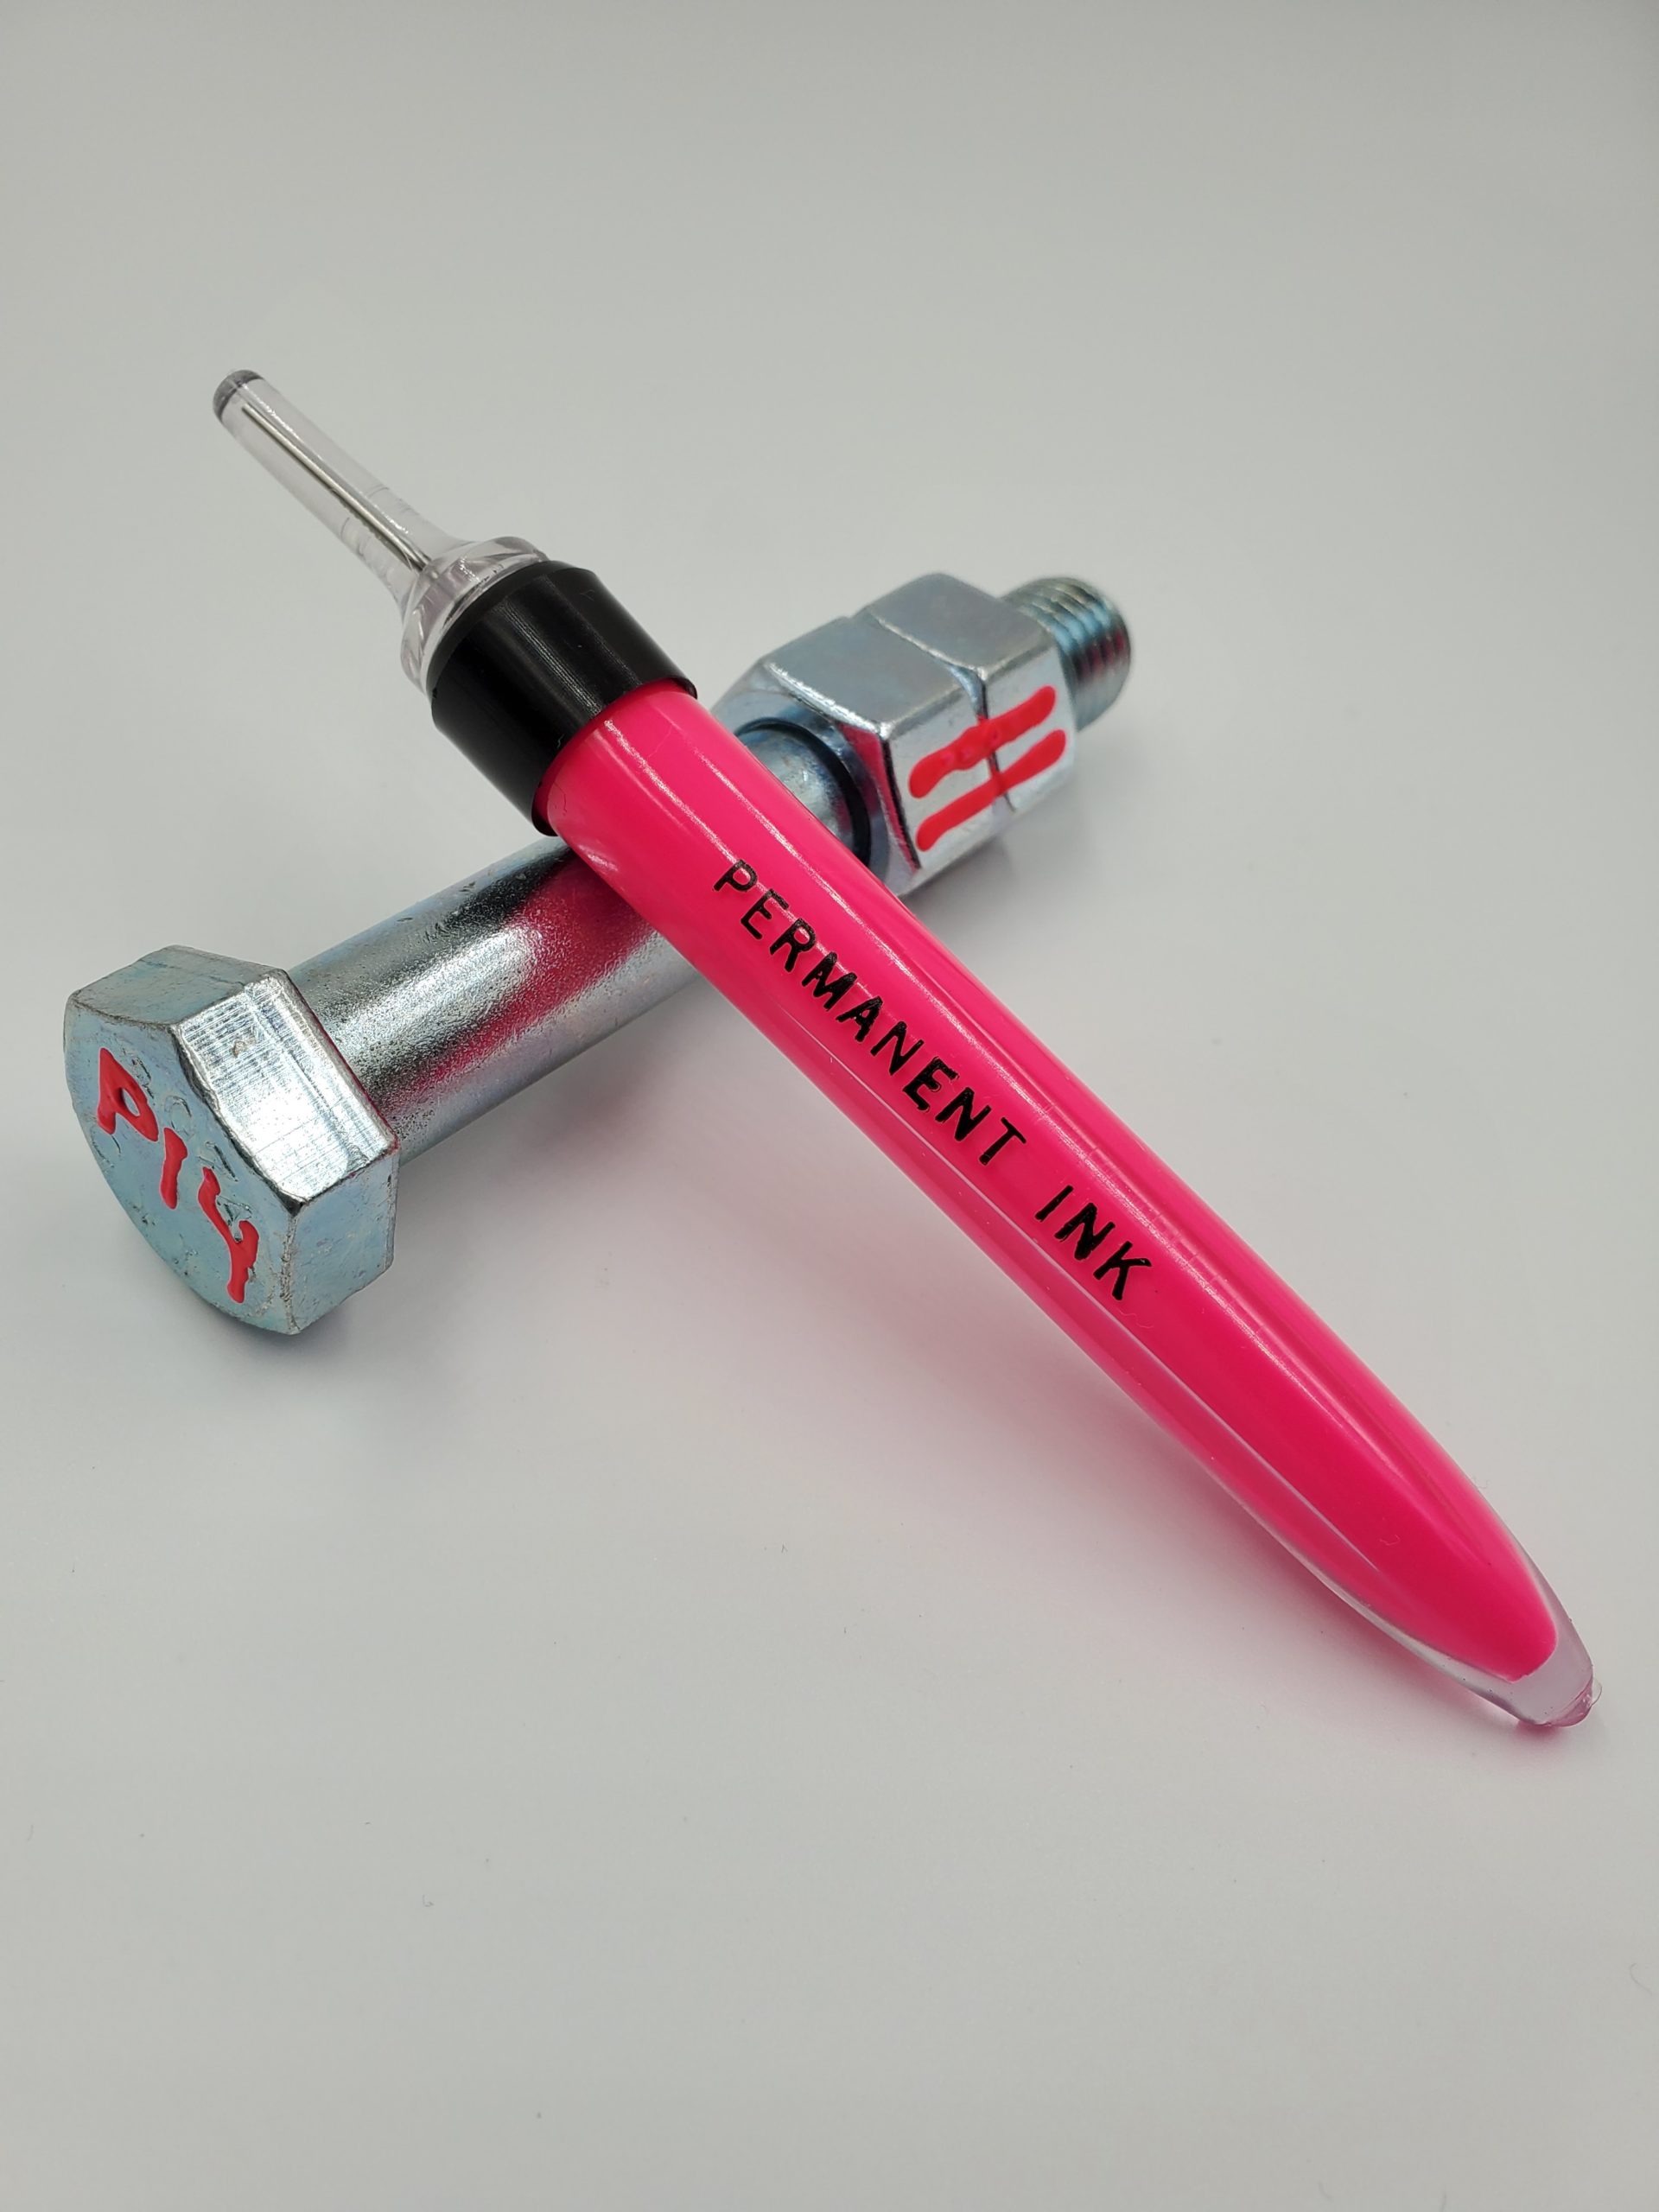 Metron Marker filled with Hot Pink Ink laying on bolt with the letters P14 written in Hot Pink on one end and two strips of the ink drawn across double bolts showcasing flexibility, color and ink being used as tamper resistant seal, torque seal, torque stripe, and vibration aid.